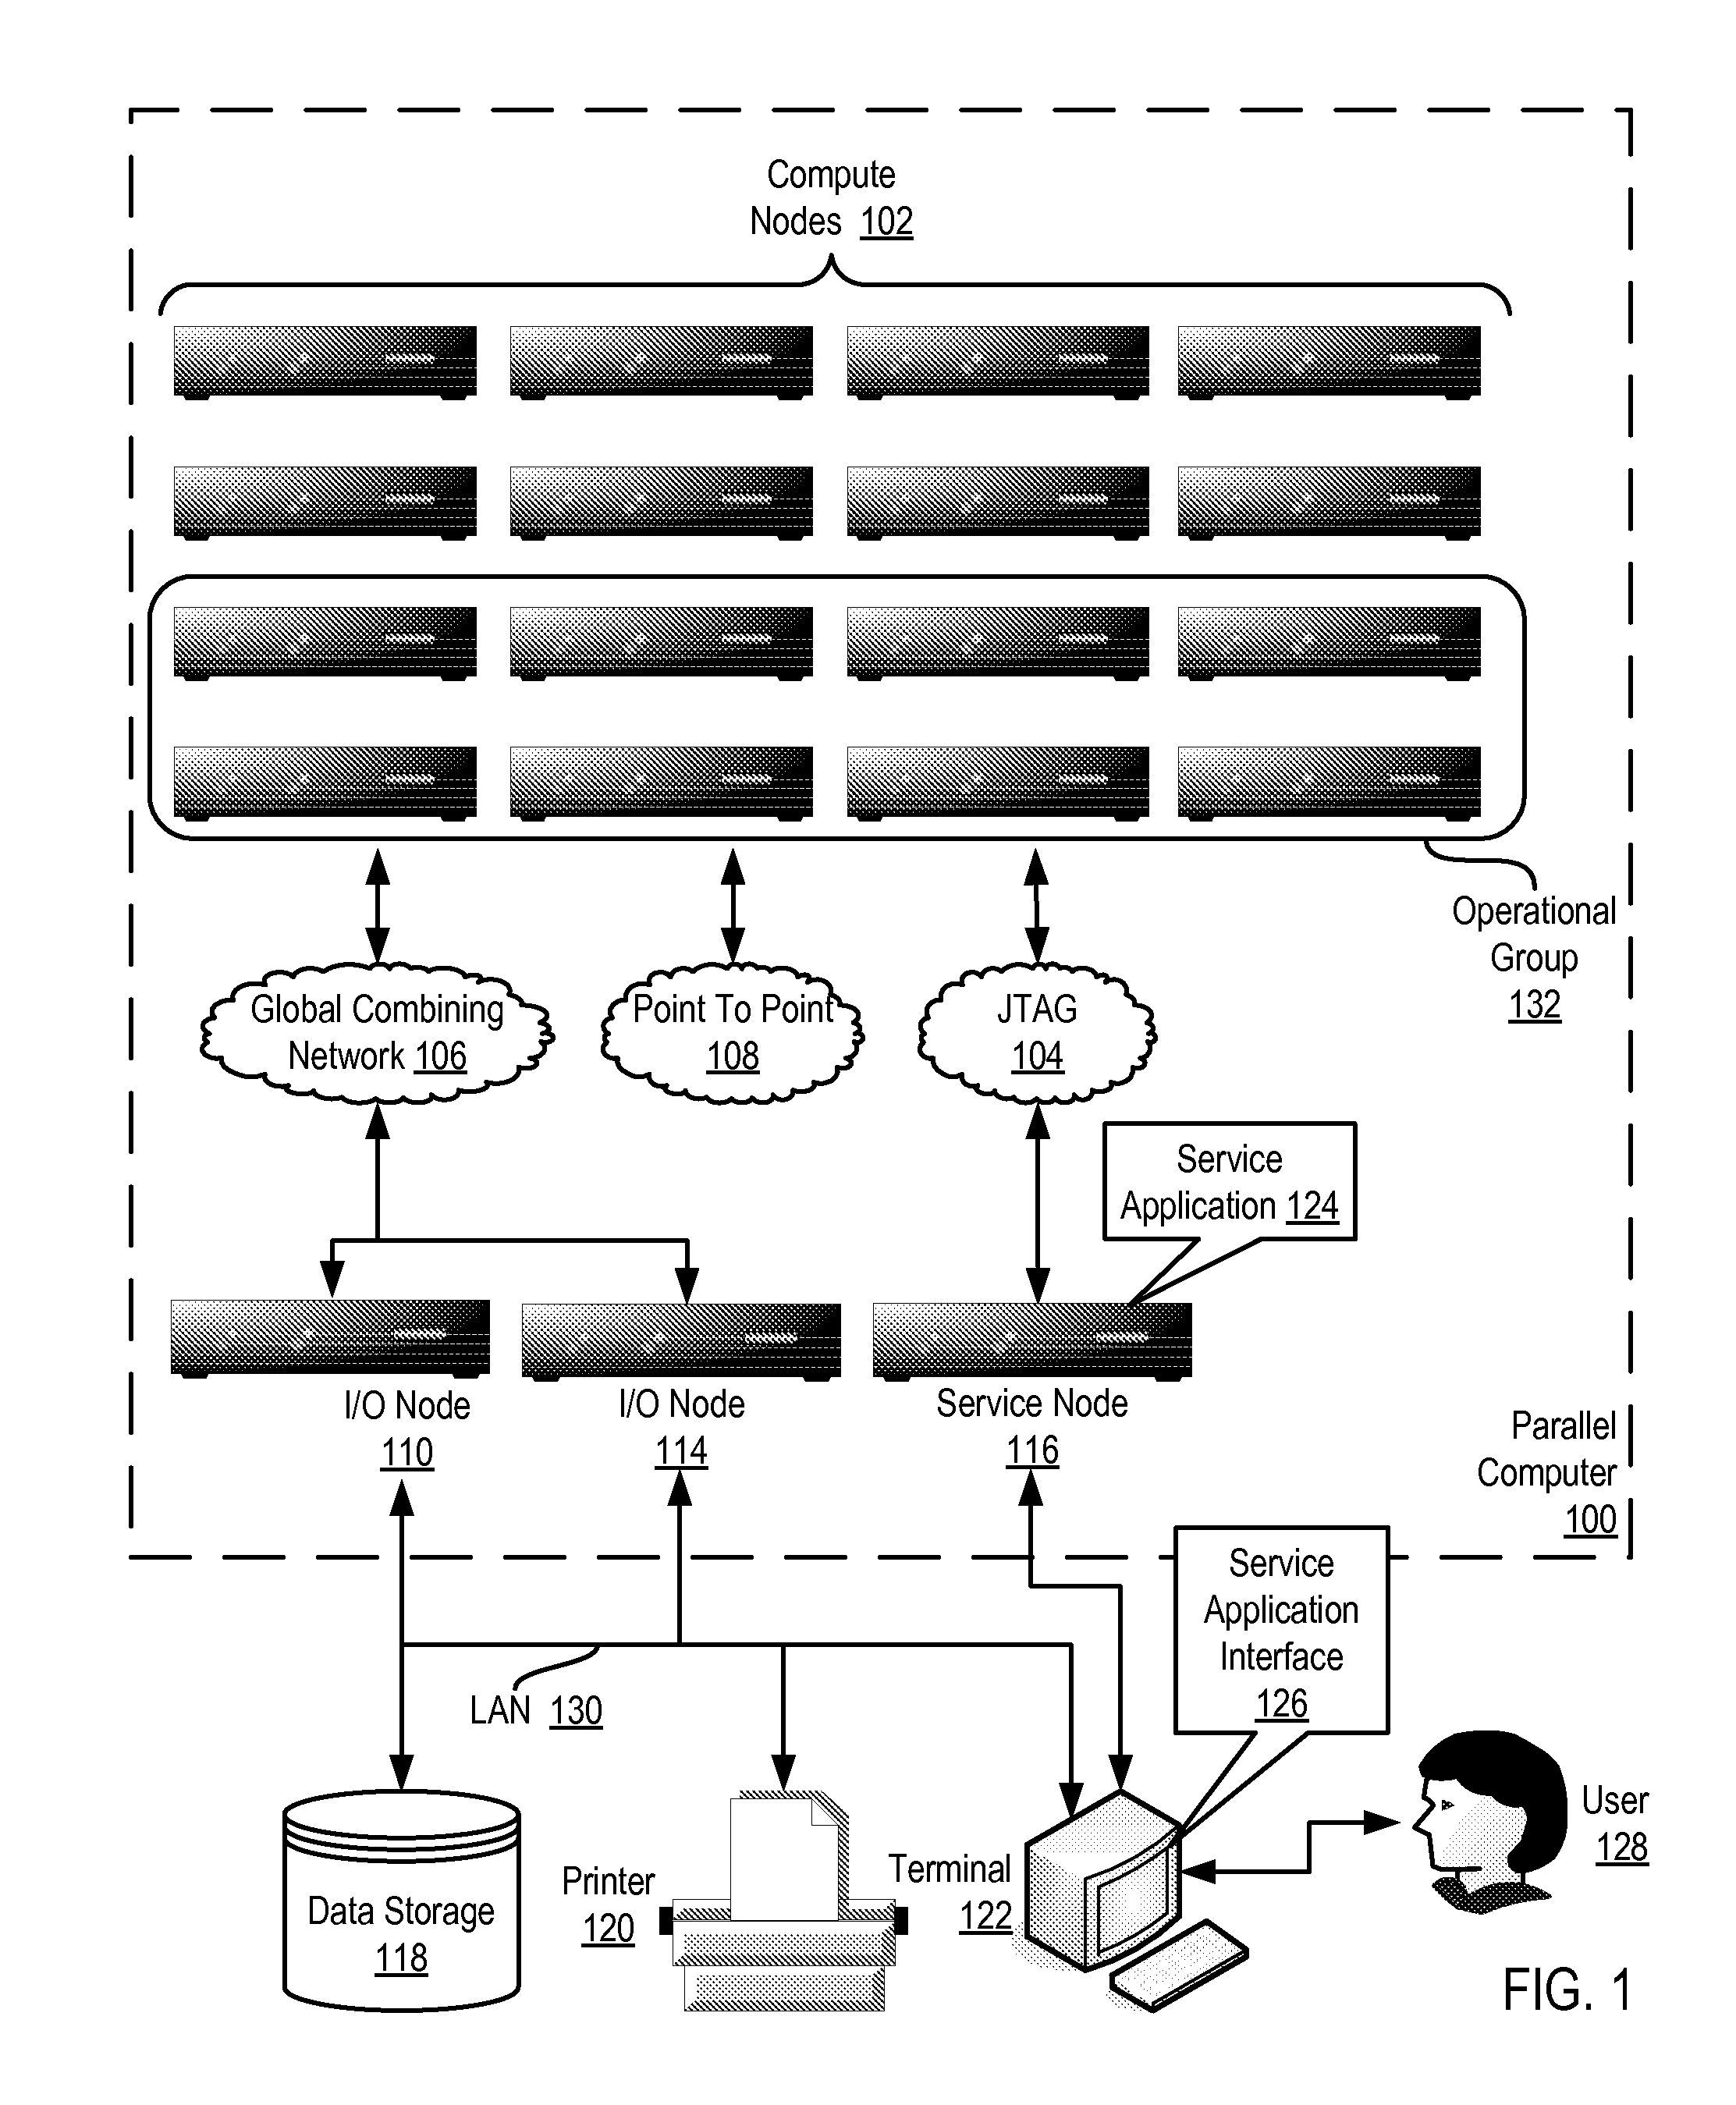 Reducing power consumption during execution of an application on a plurality of compute nodes